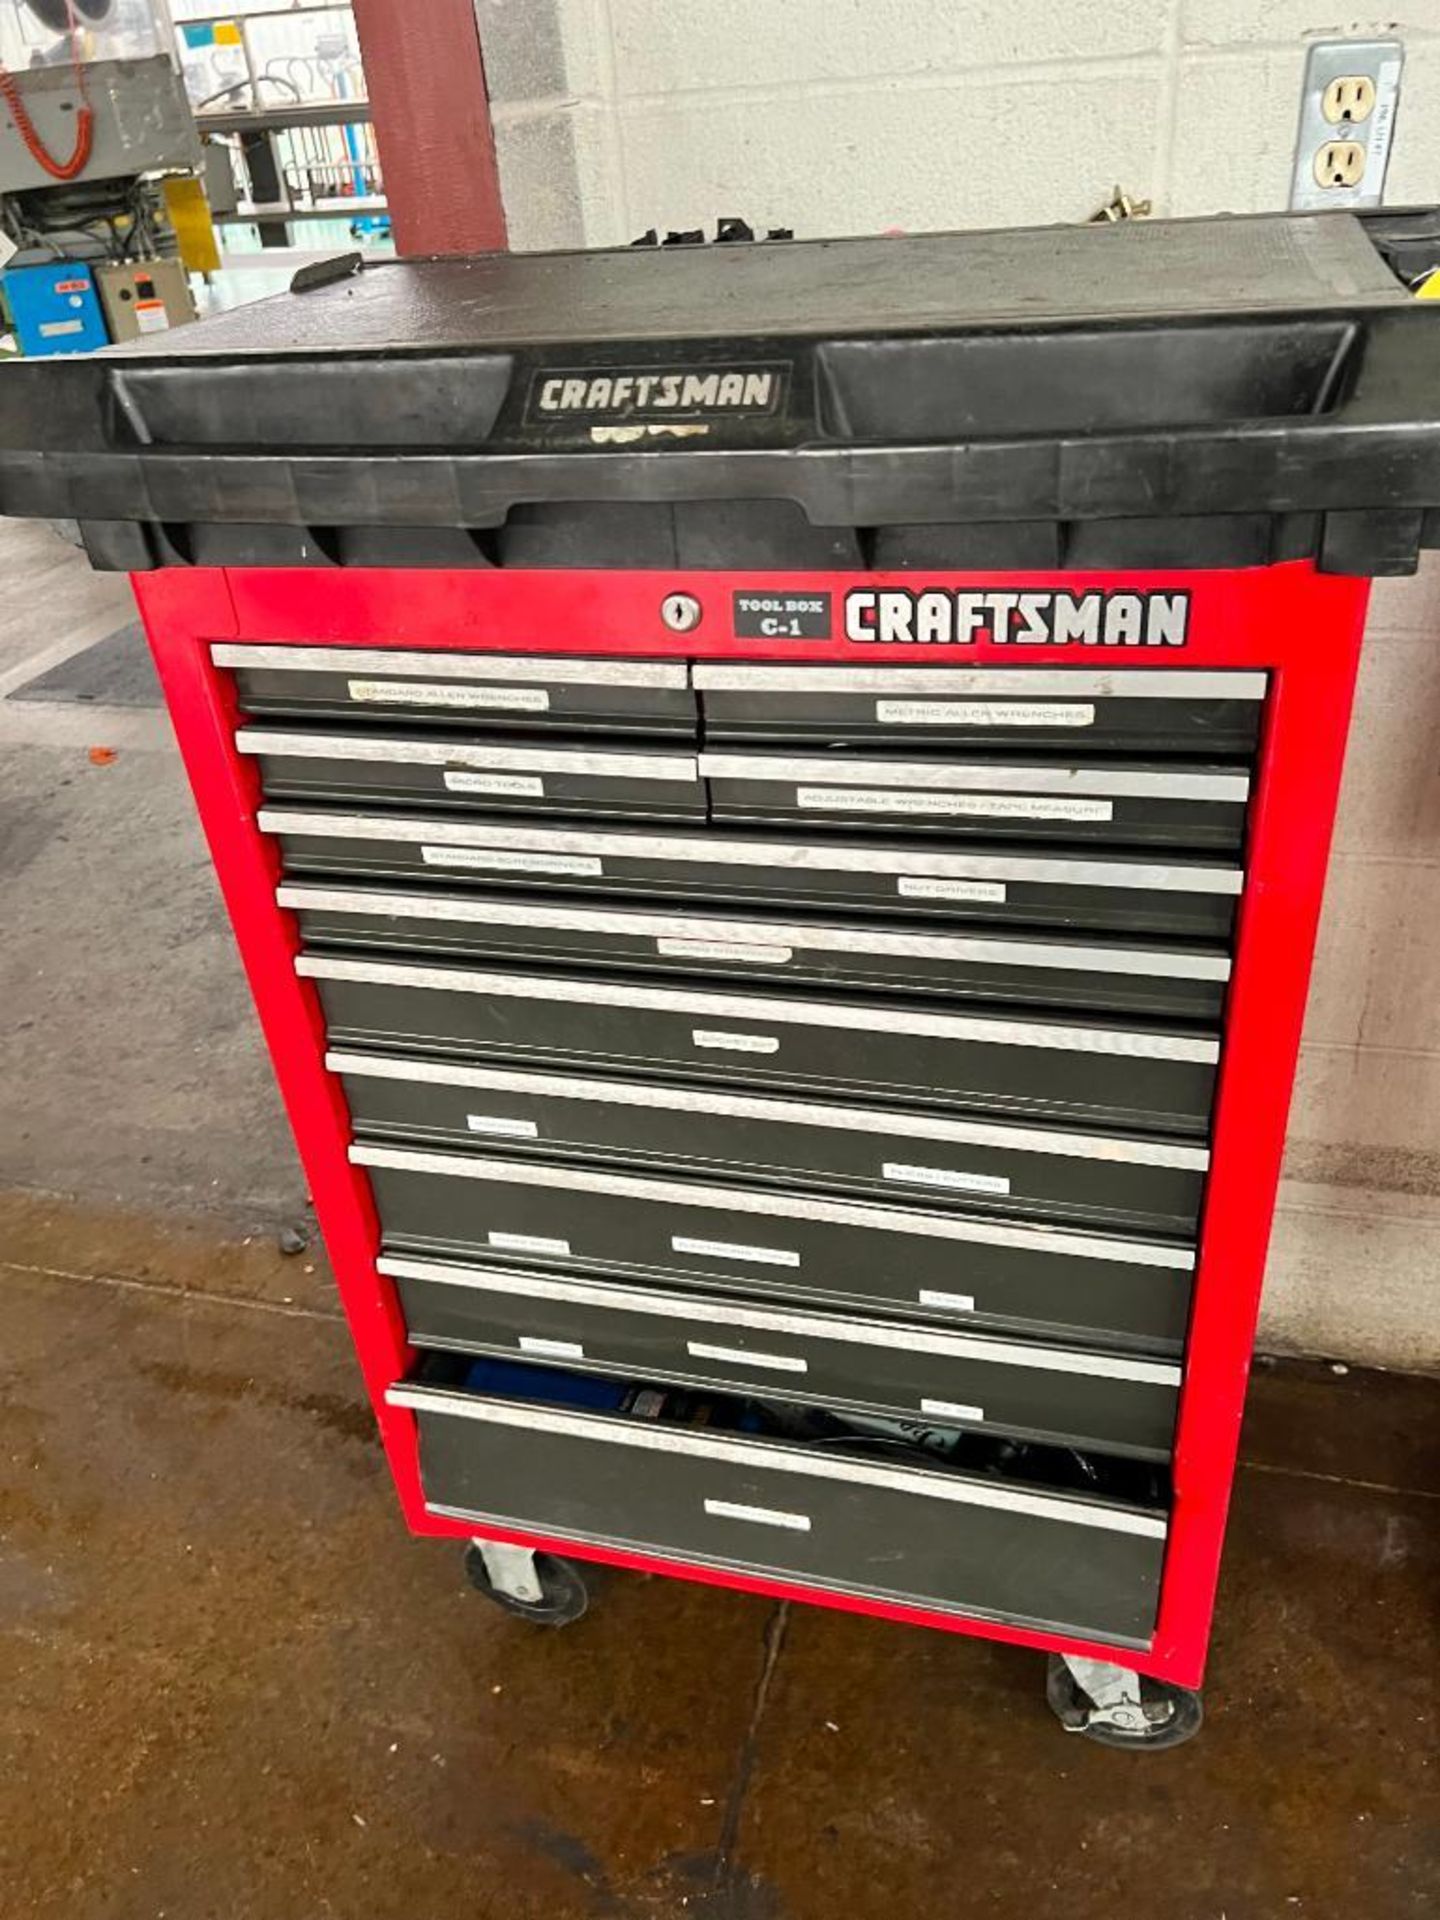 Craftsman 11-Drawer Rolling Toolbox w/ Content of Assorted Tools